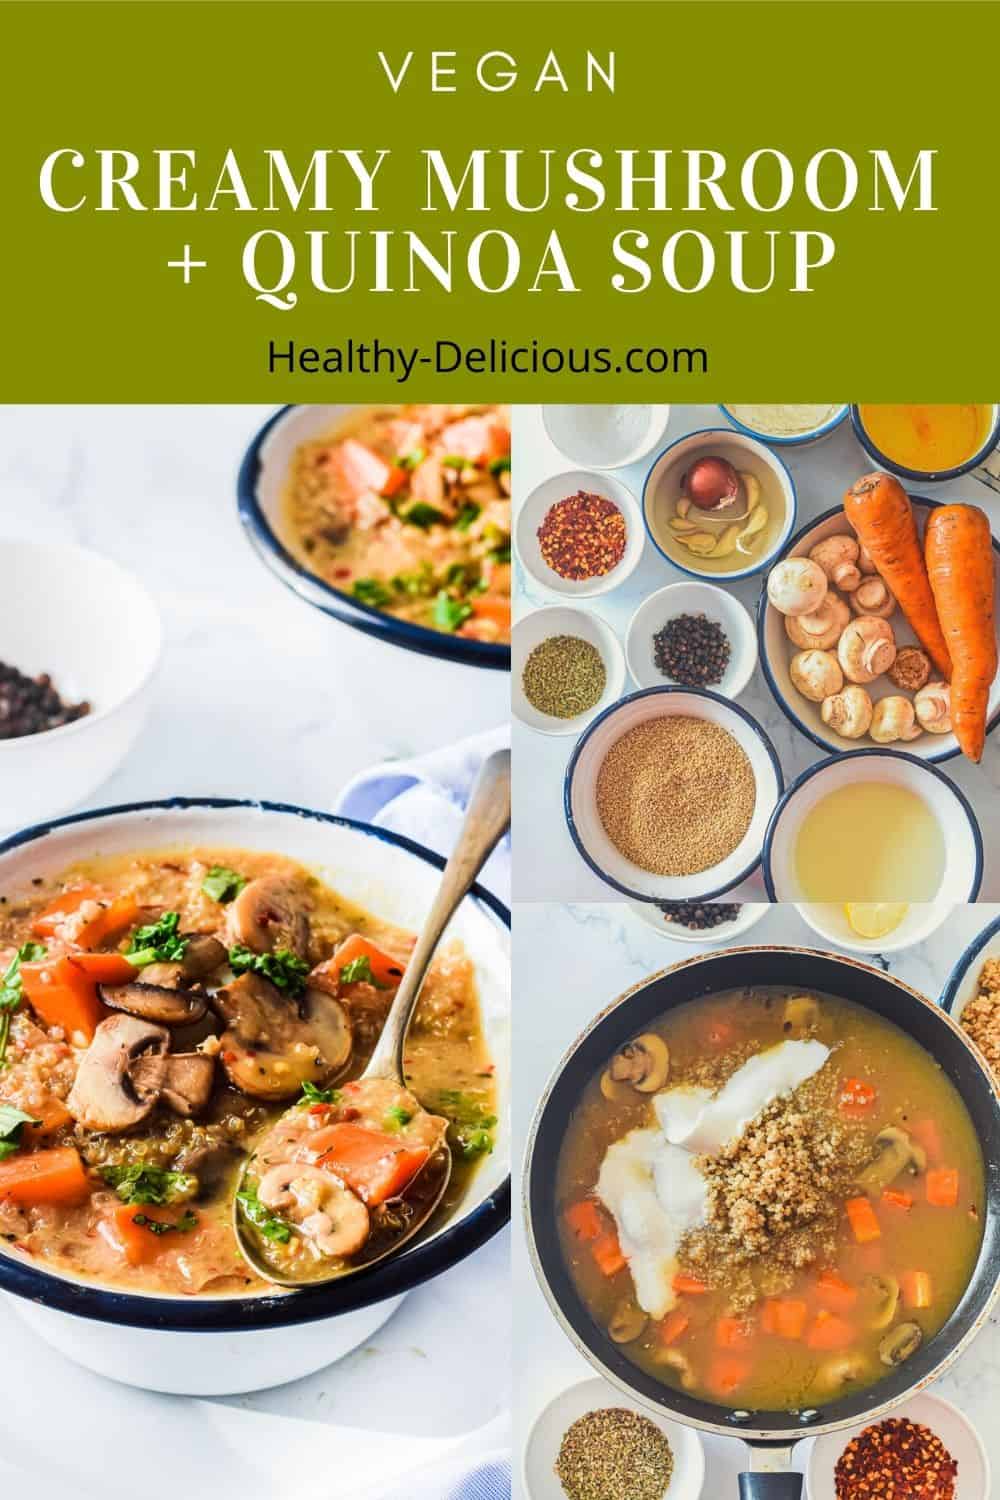 Creamy Mushroom + Quinoa Soup is a cozy winter meal. Coconut milk adds creaminess while keeping this delicious vegan mushroom soup recipe dairy free. via @HealthyDelish